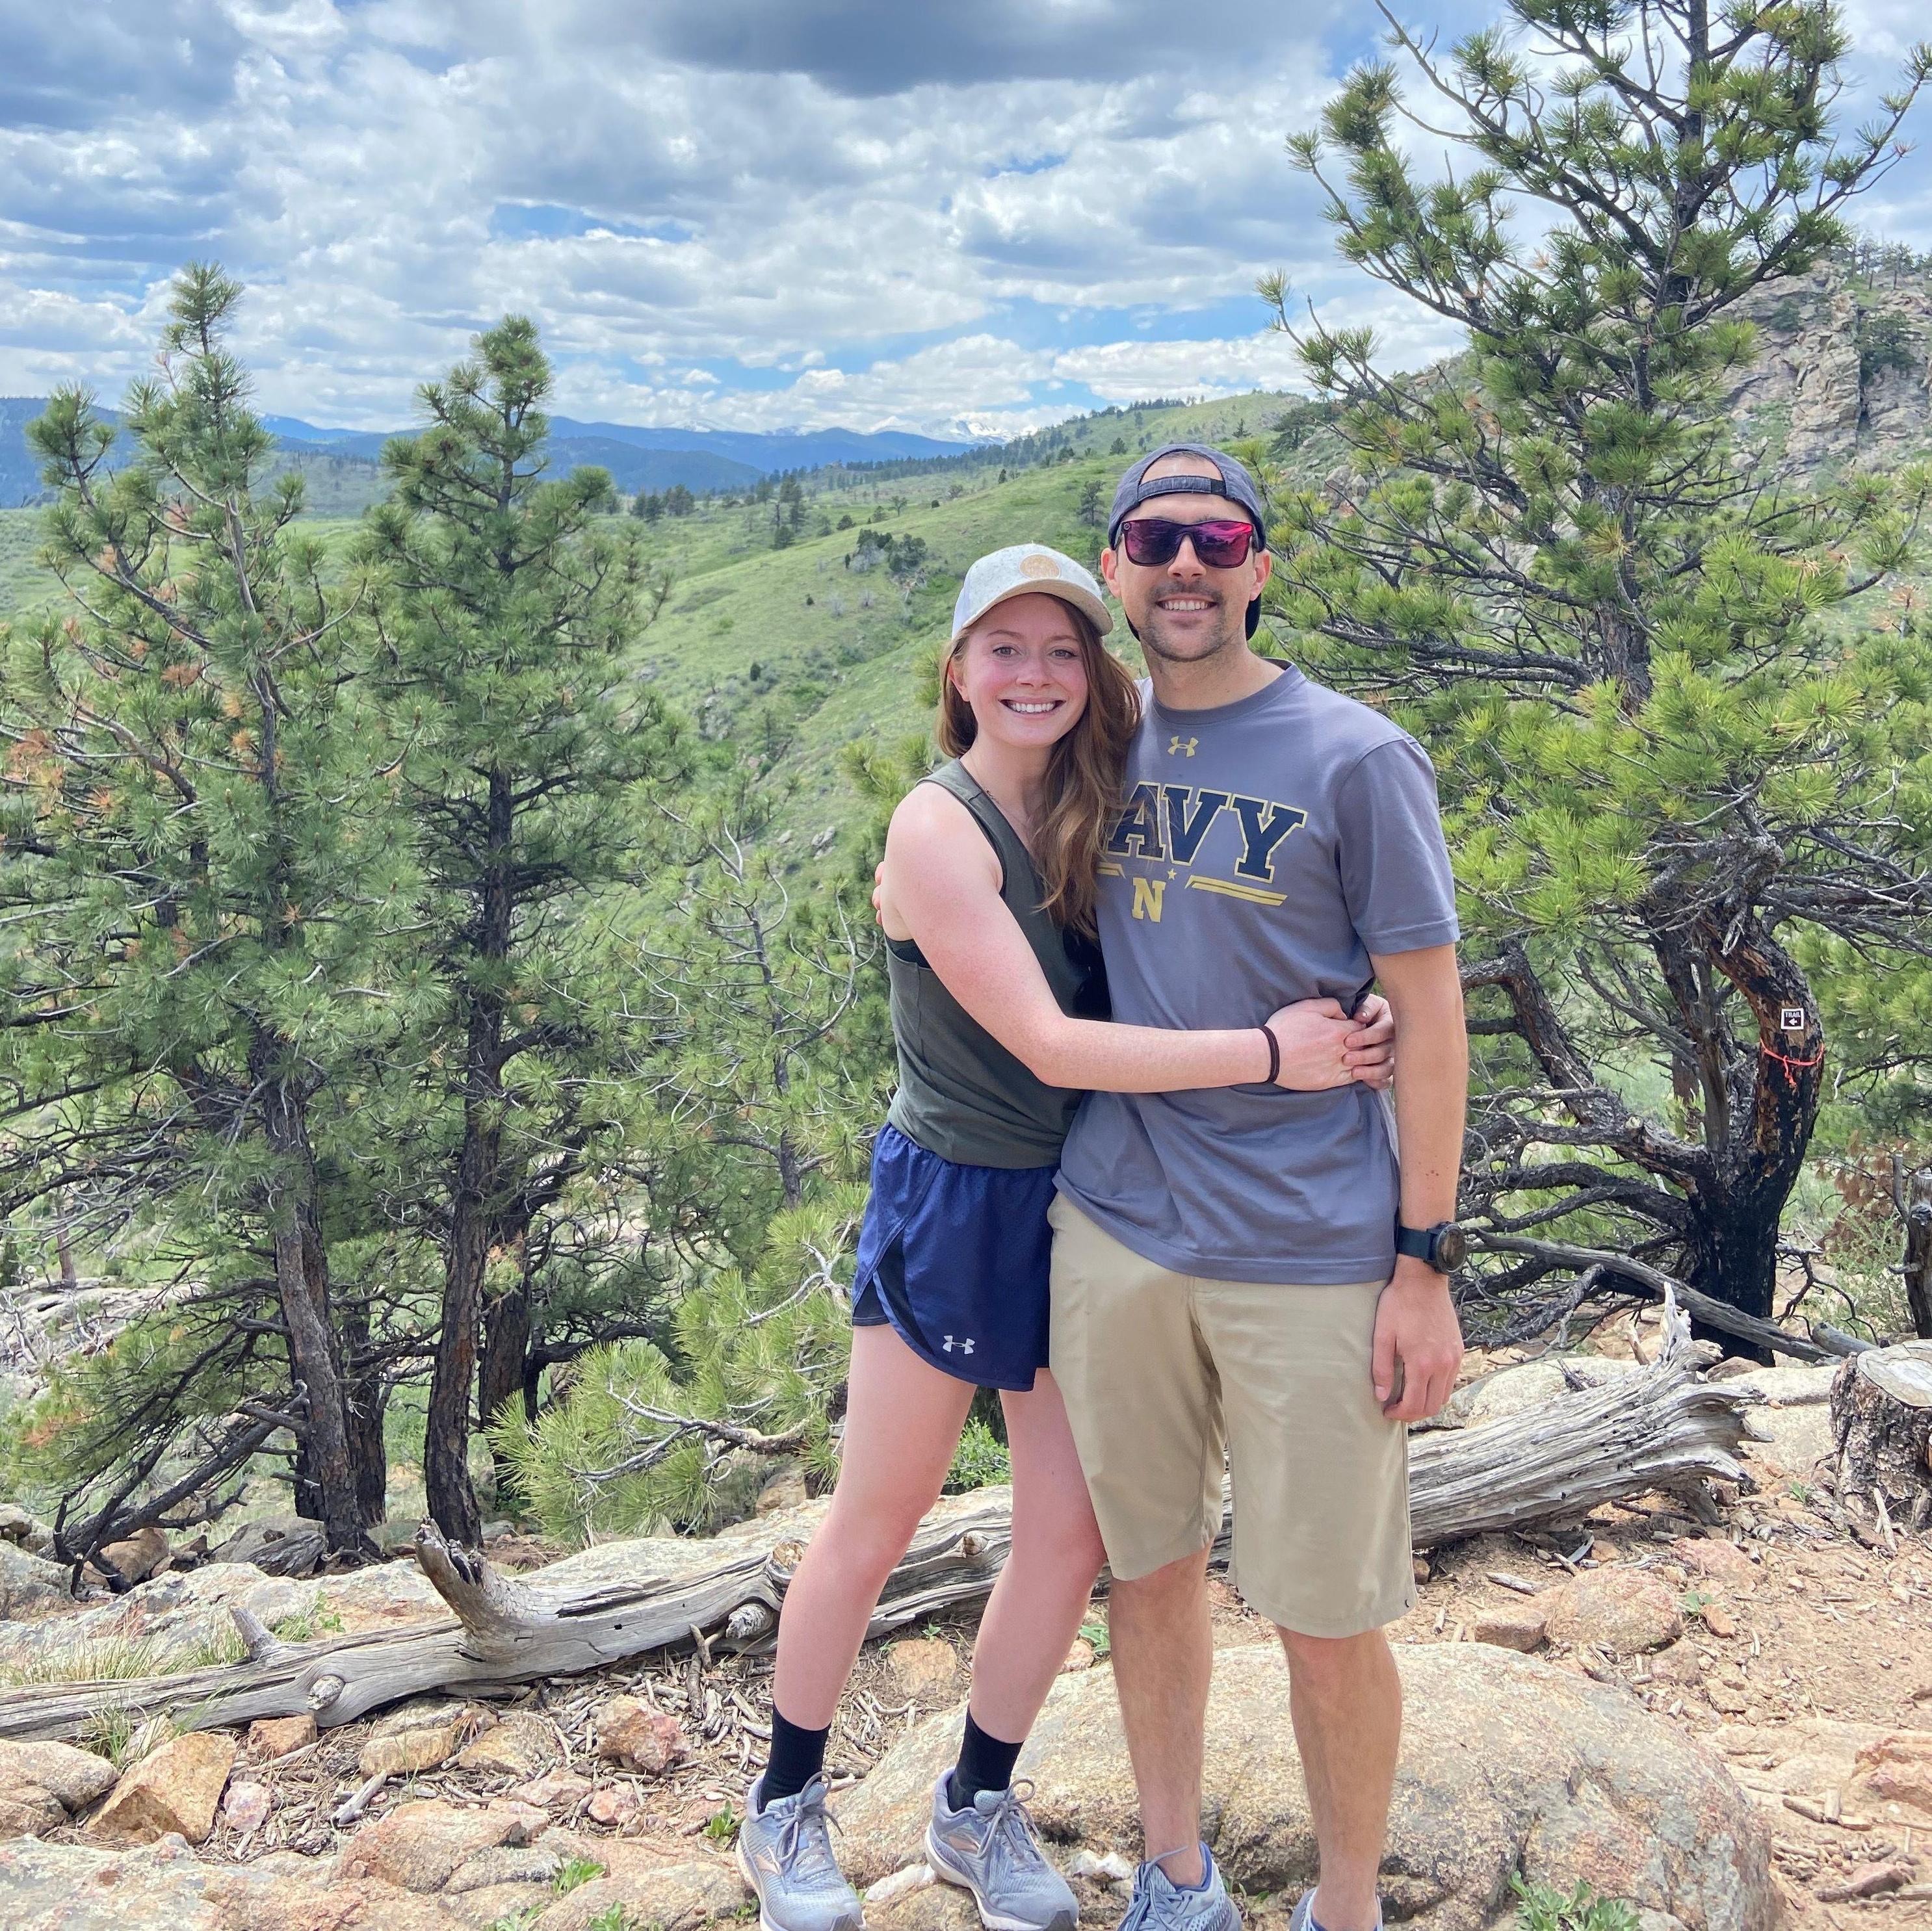 Hiking in Colorado while visiting Parker